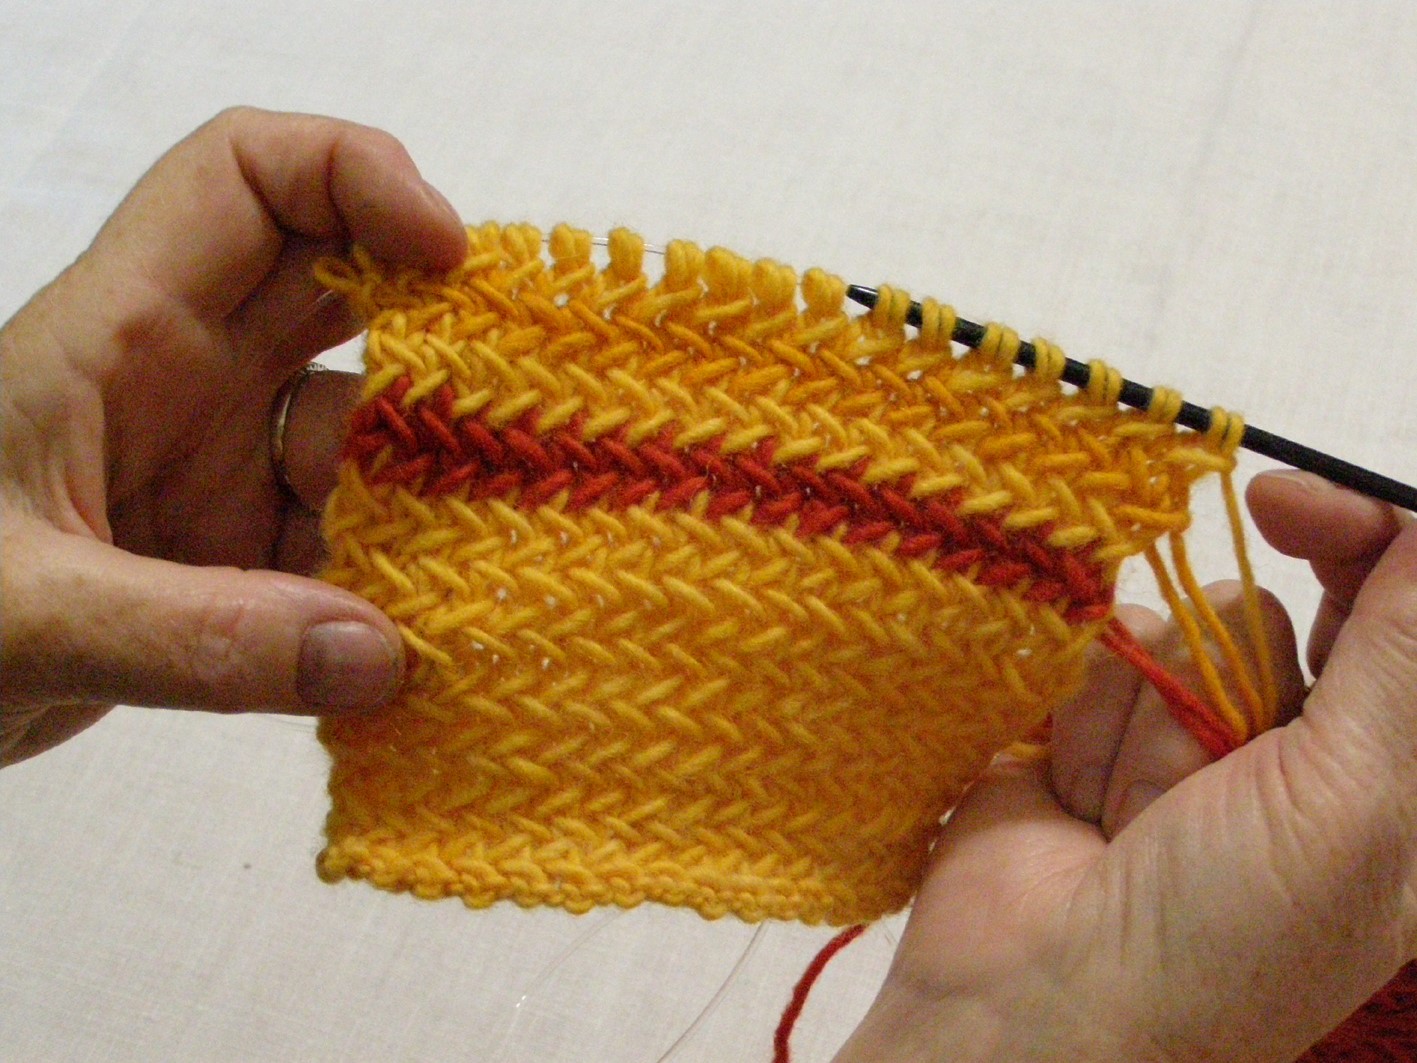 Knitting course: Instructions for the peruvian weave-knit pattern